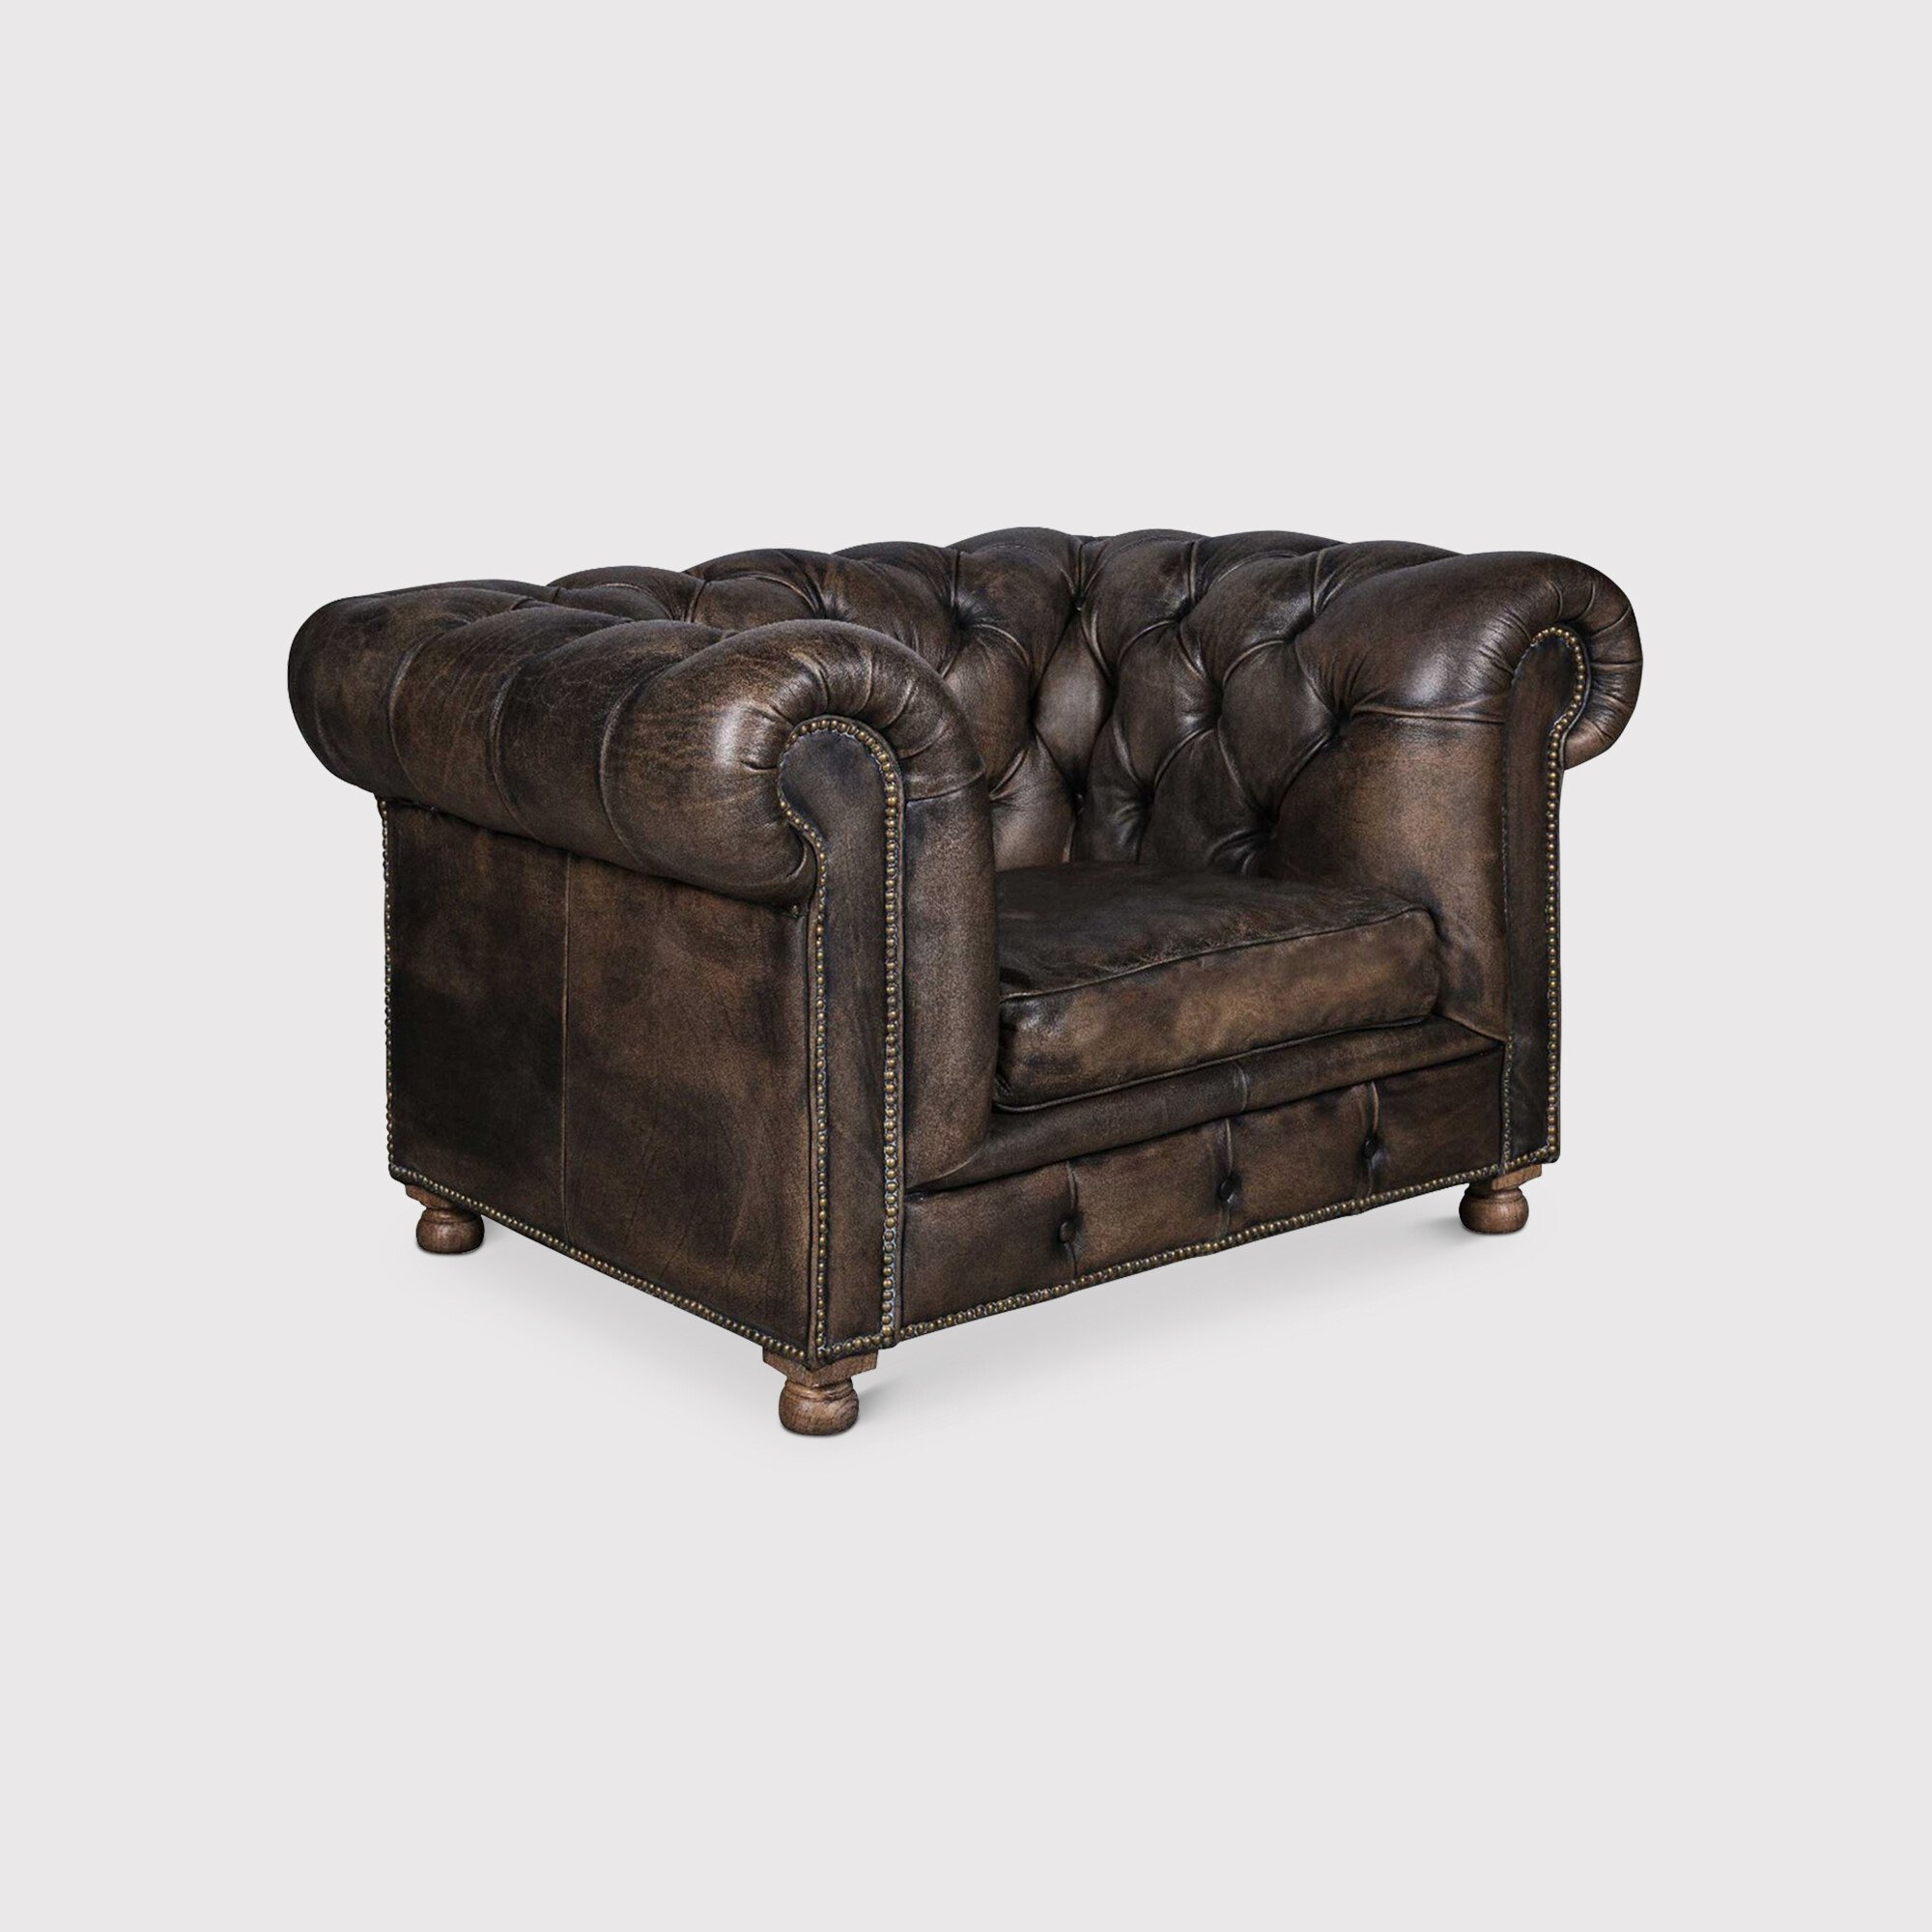 Timothy Oulton Westminster Feather Sofa 1 Seater, Black Leather | Barker & Stonehouse